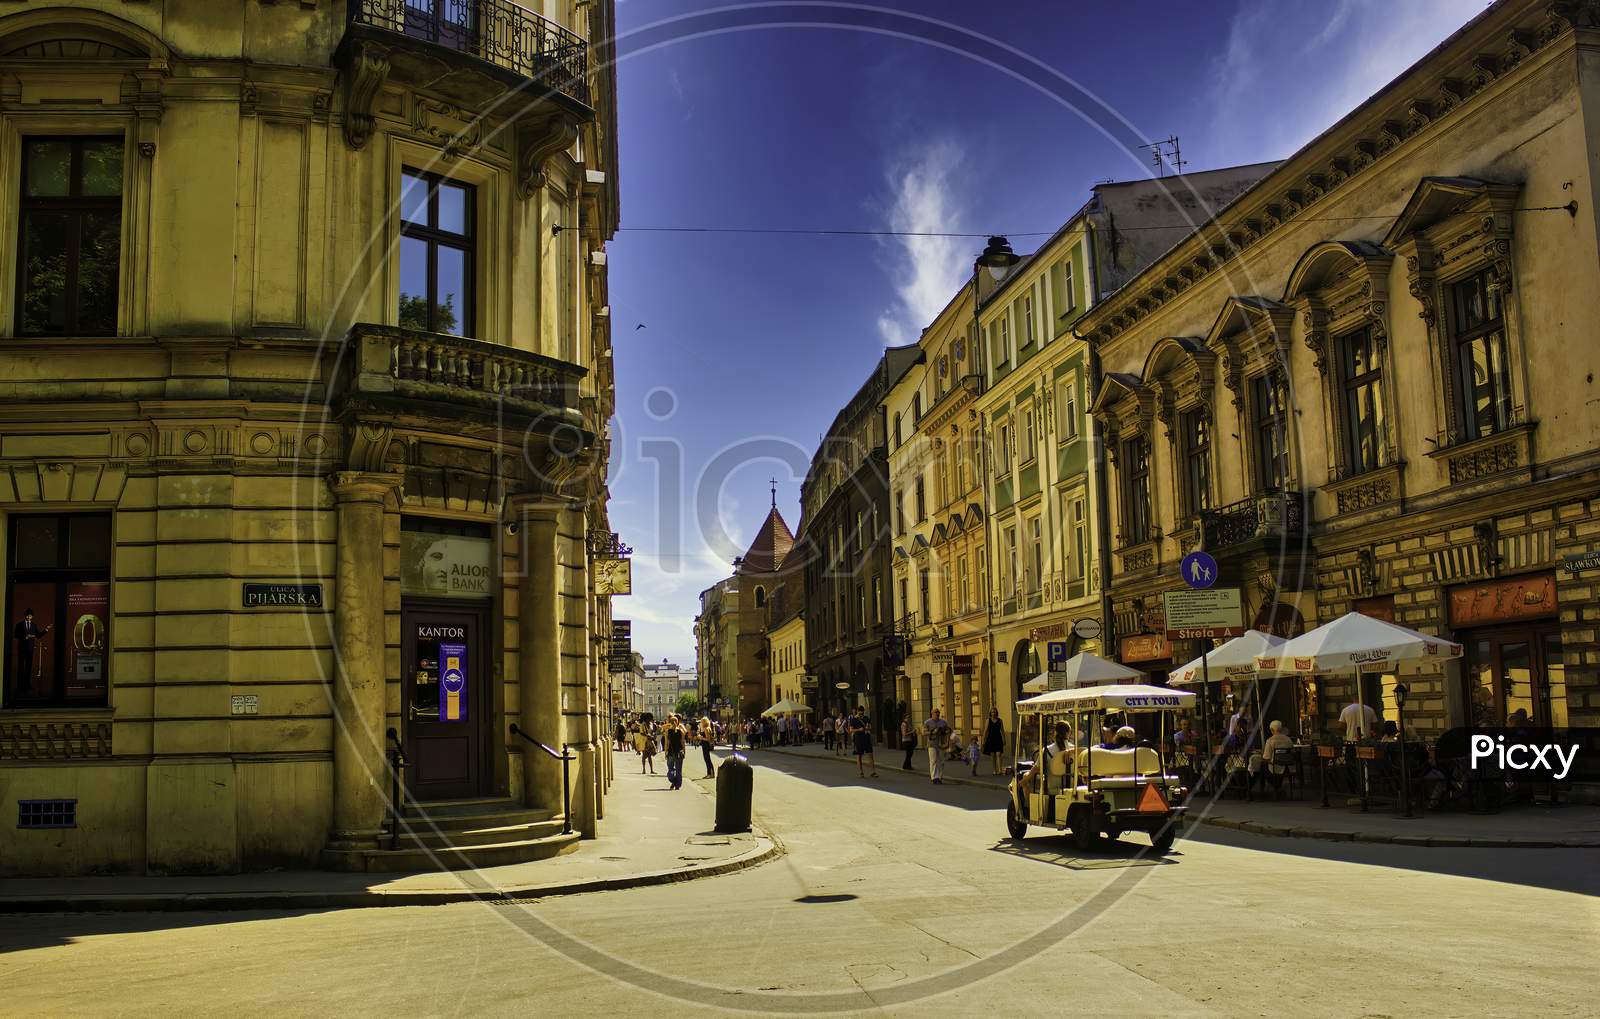 Krakow, Poland - June 08, 2014: A Wide Angle Shot Of Polish Street And Architecture And An Open City Tour Car With Tourists